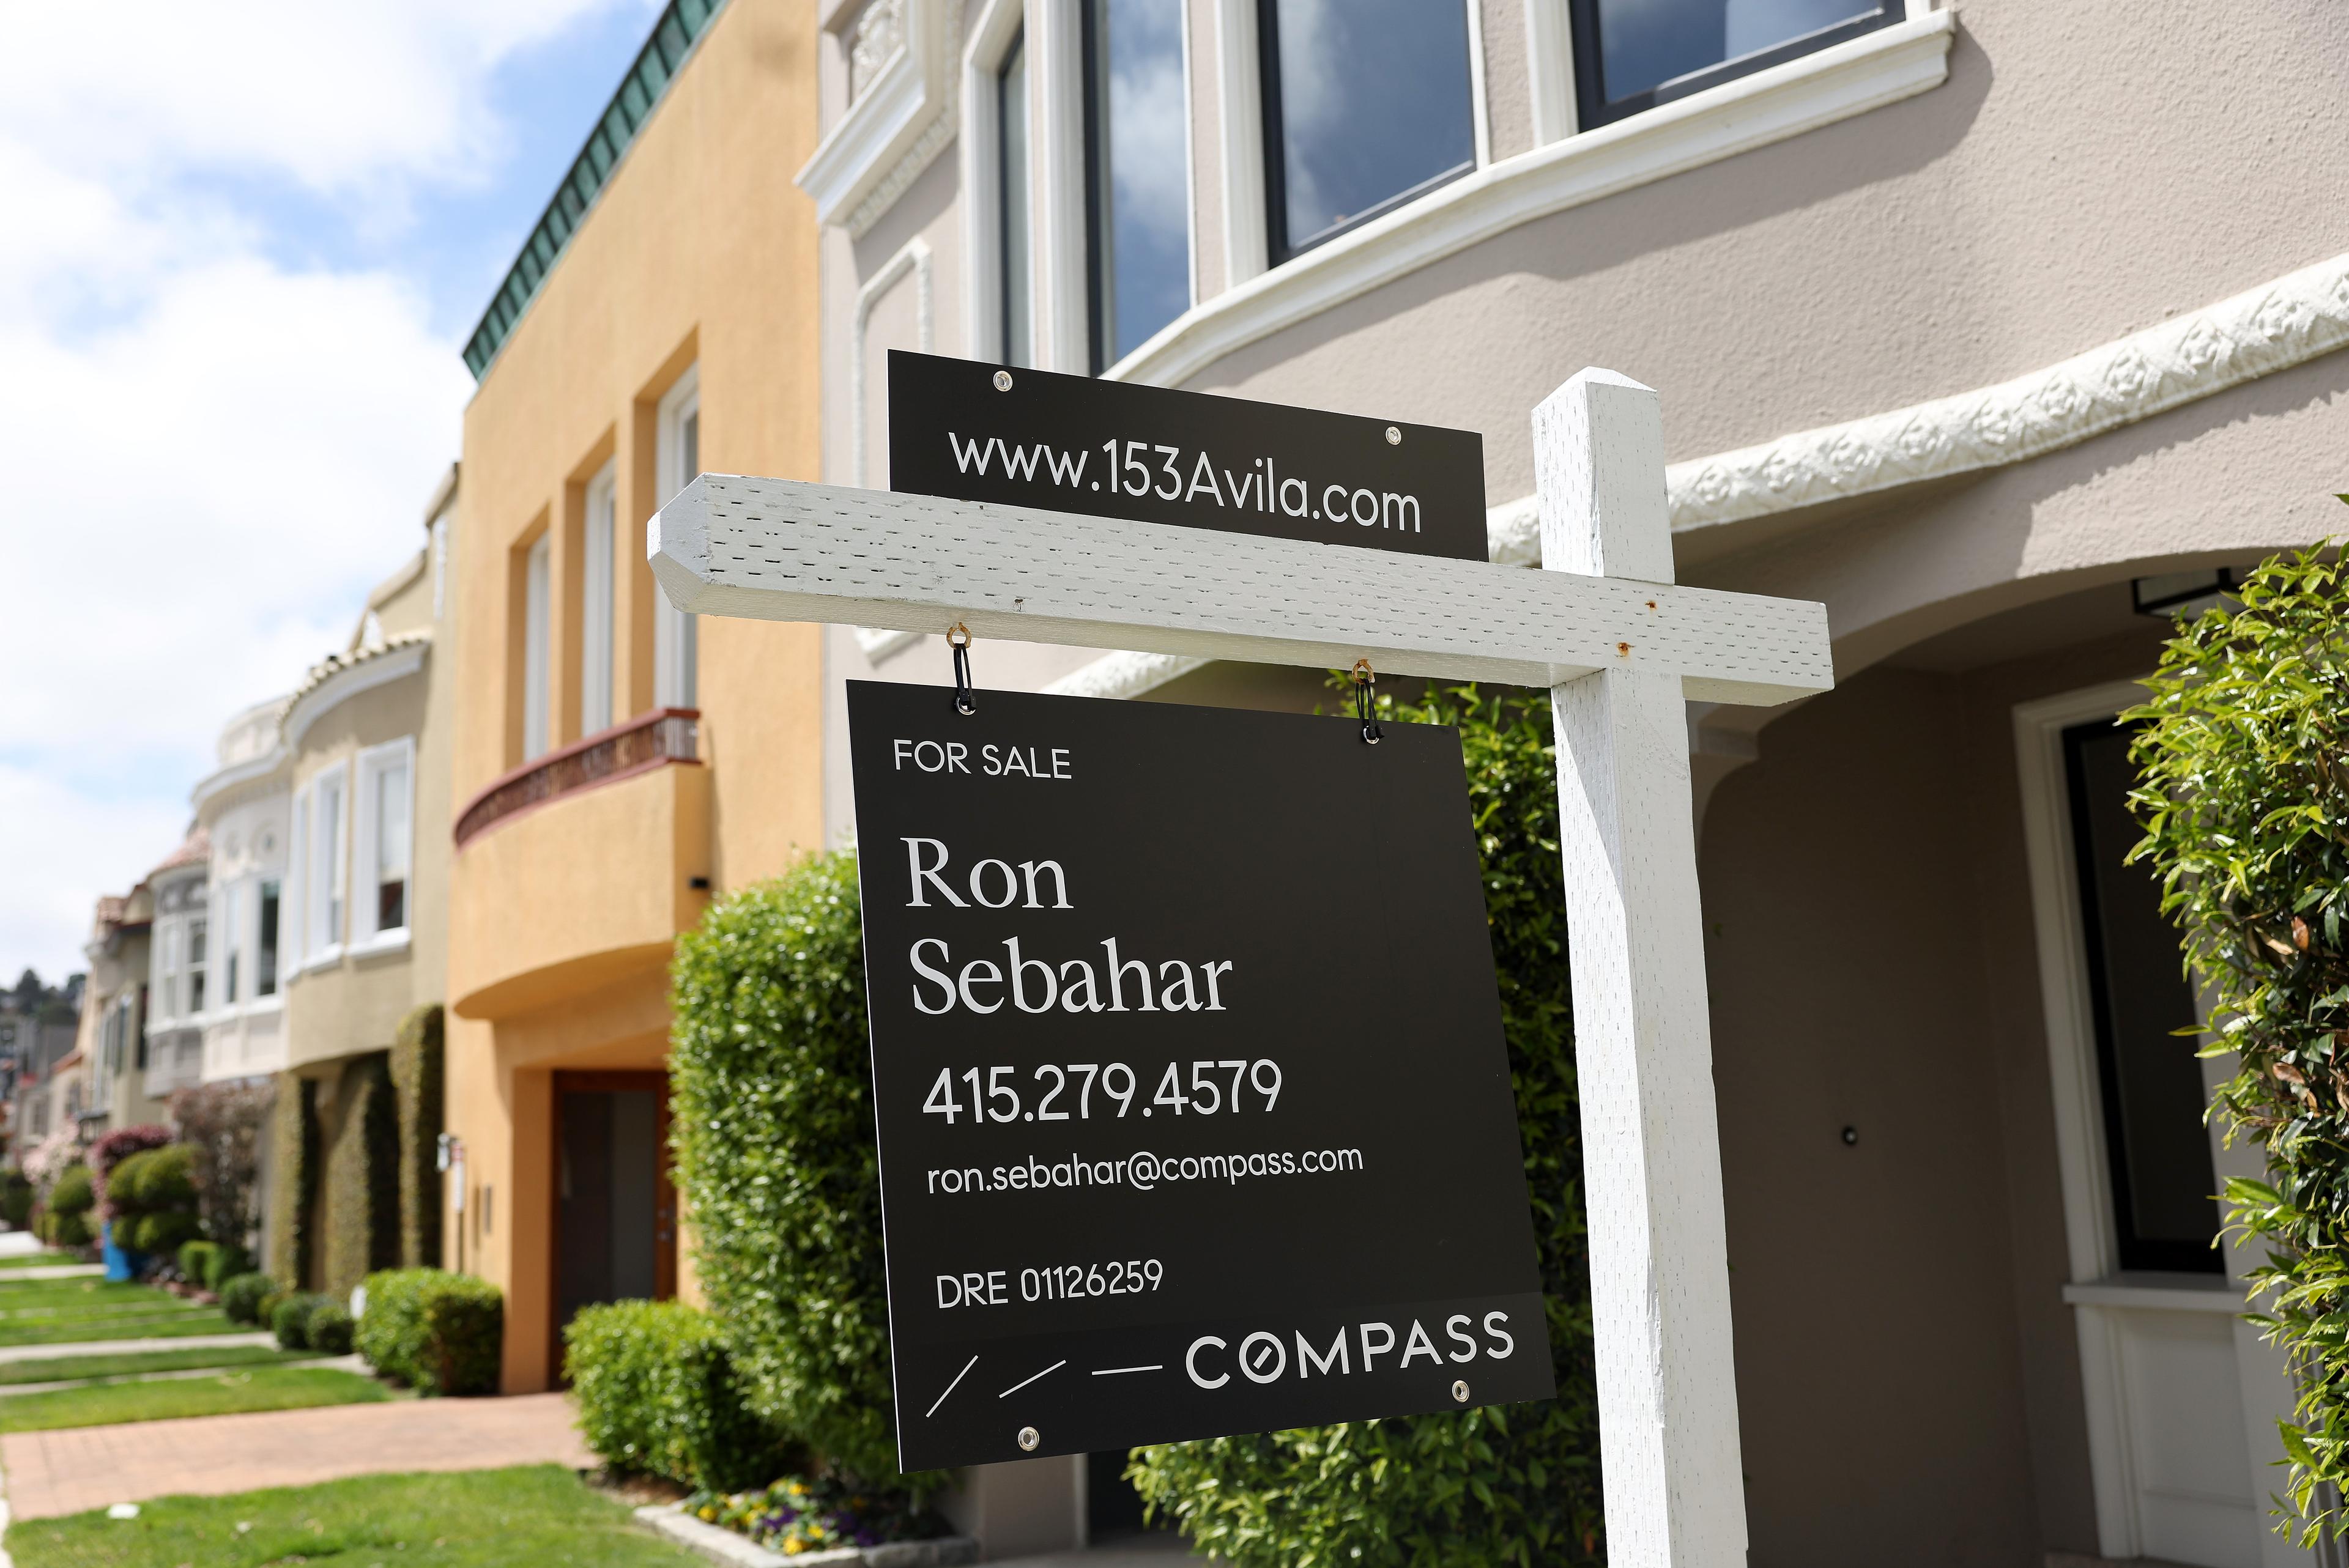 November California Home Sales Lowest Since Great Recession